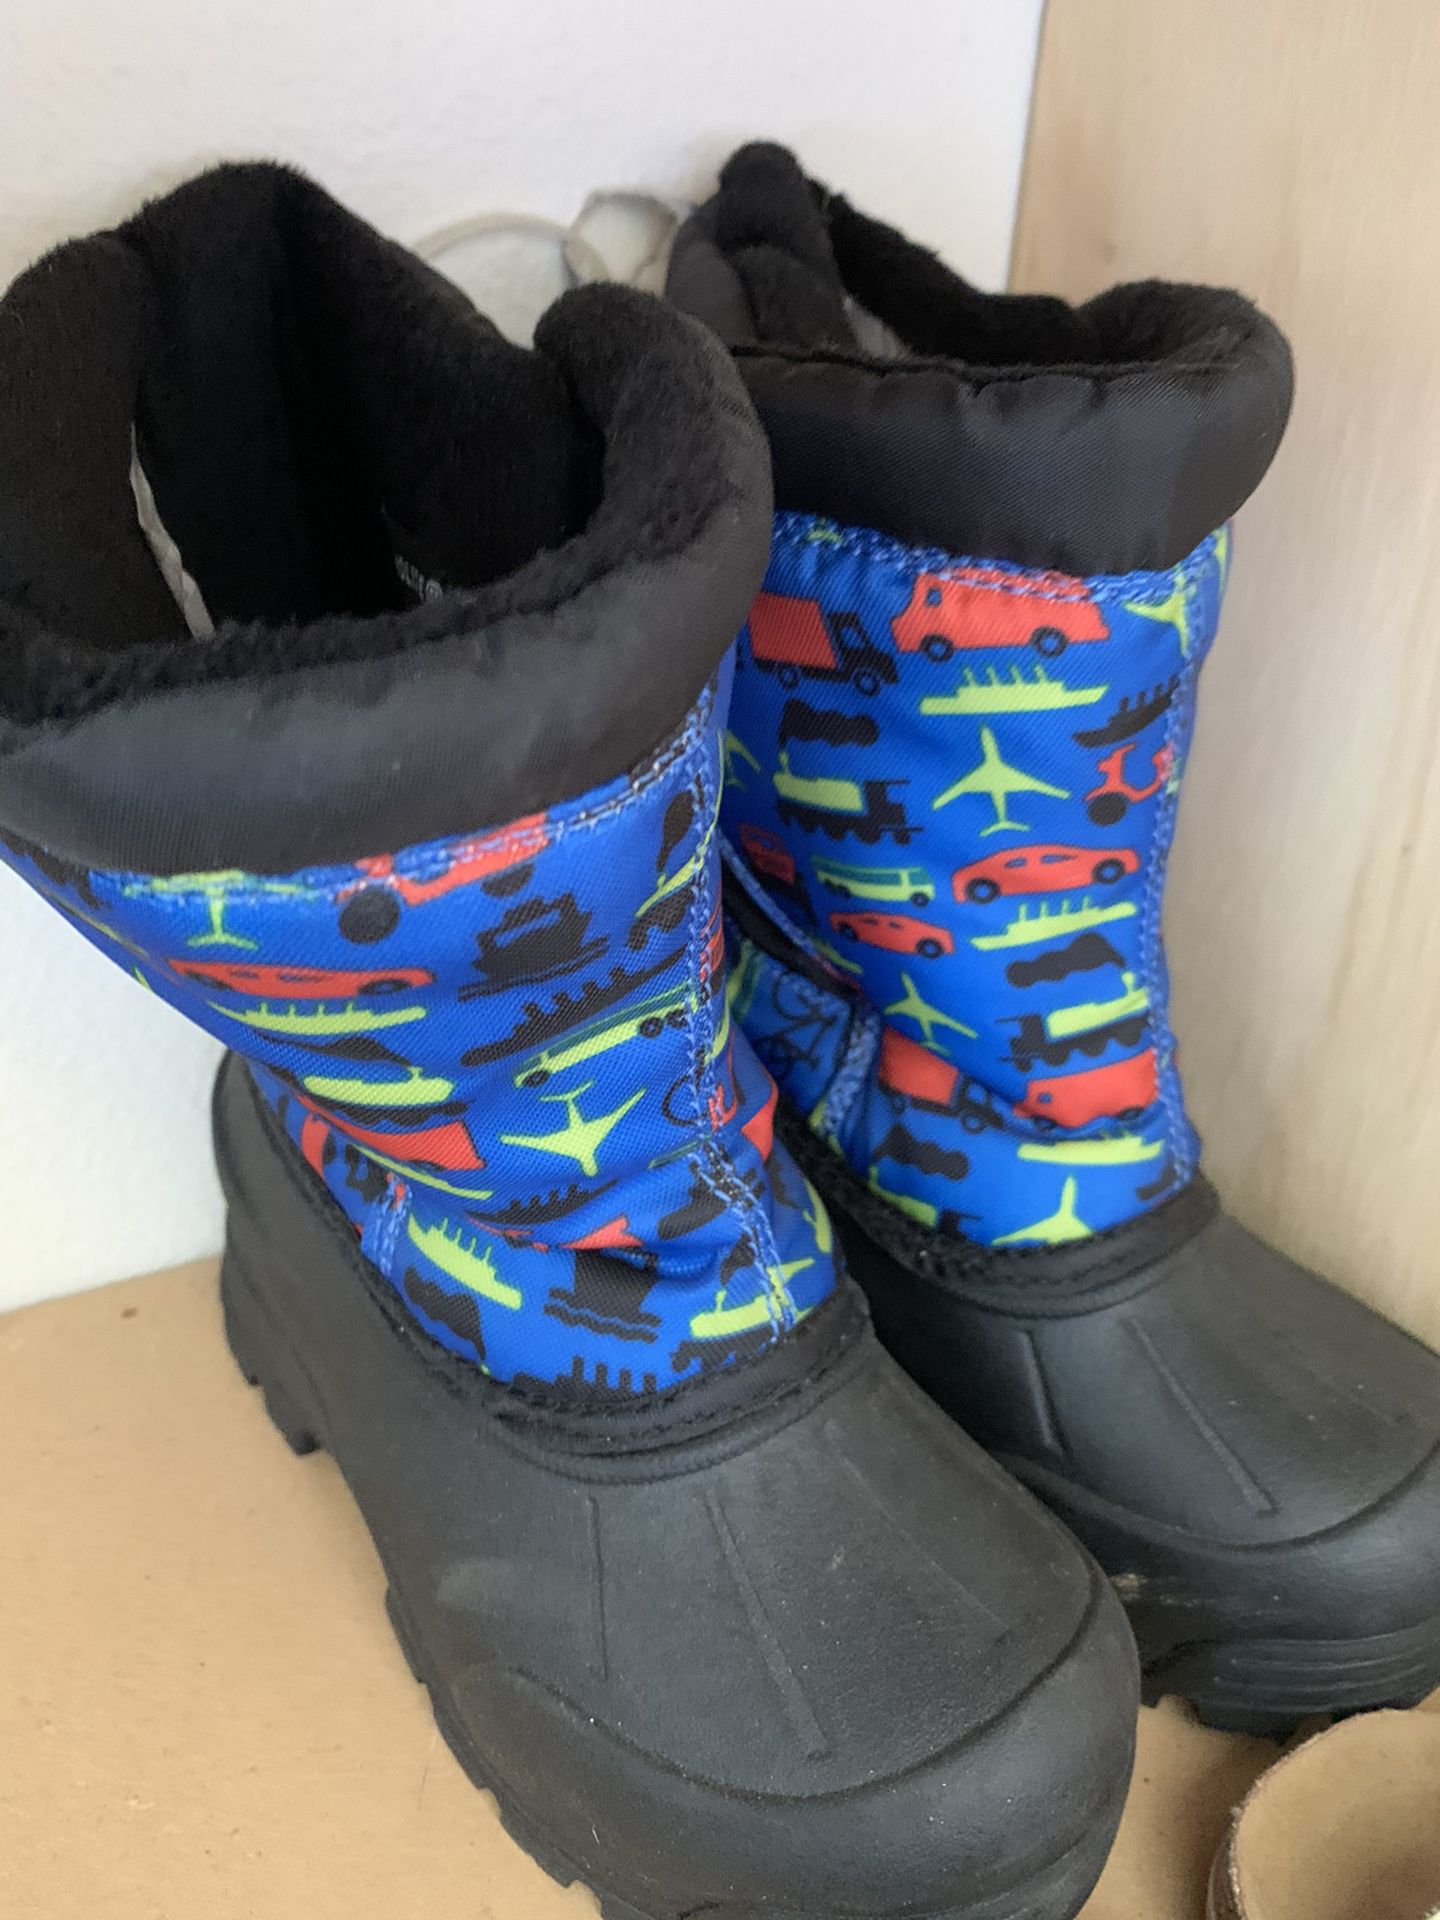 Snow boots for toddler